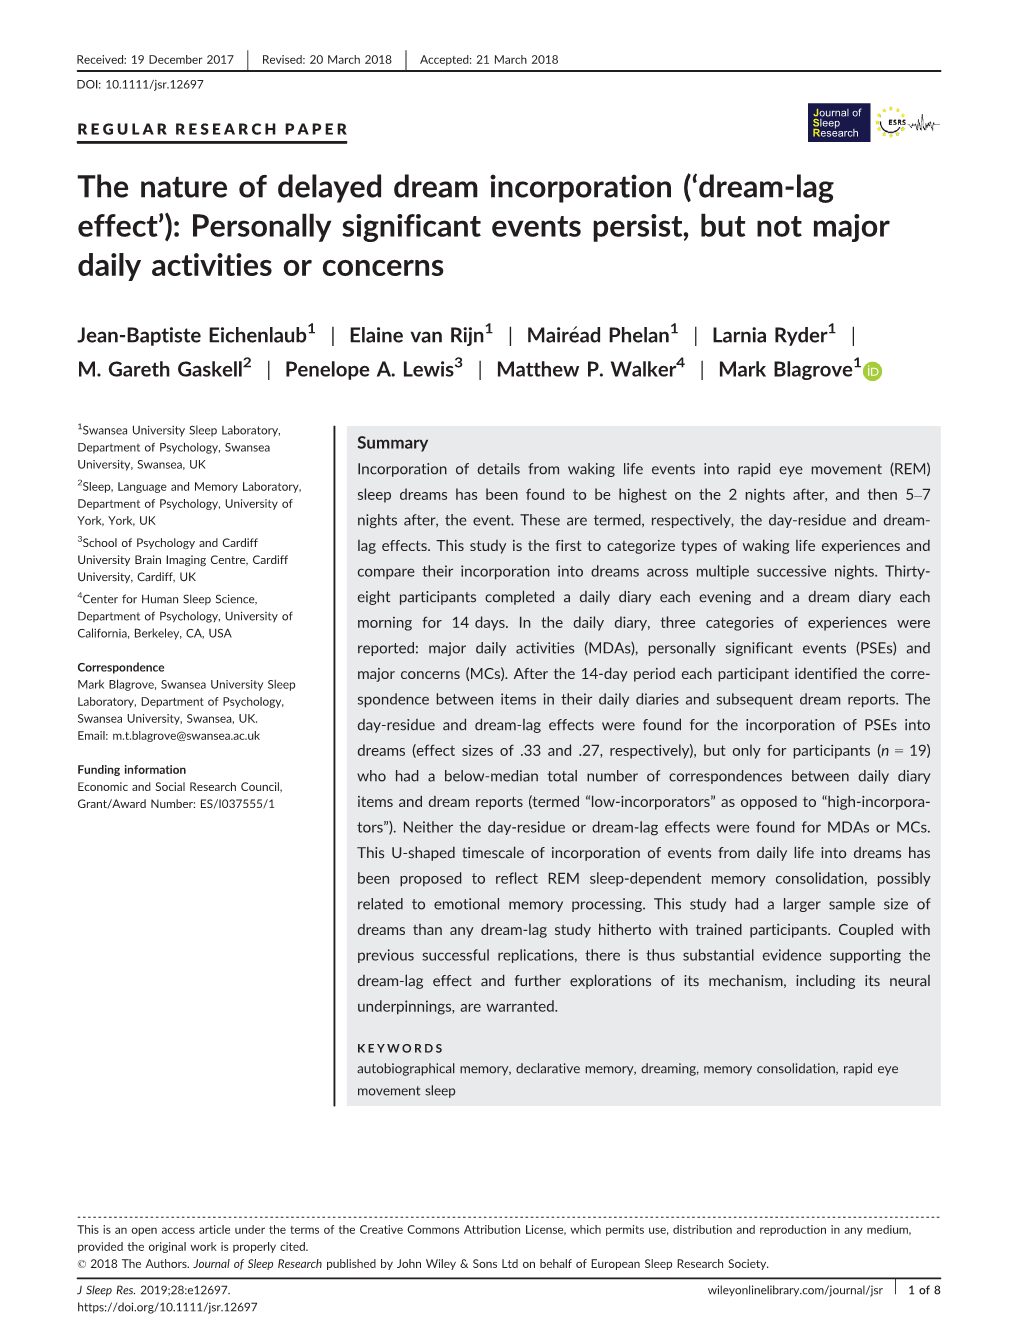 The Nature of Delayed Dream Incorporation ('Dream-Lag Effect')